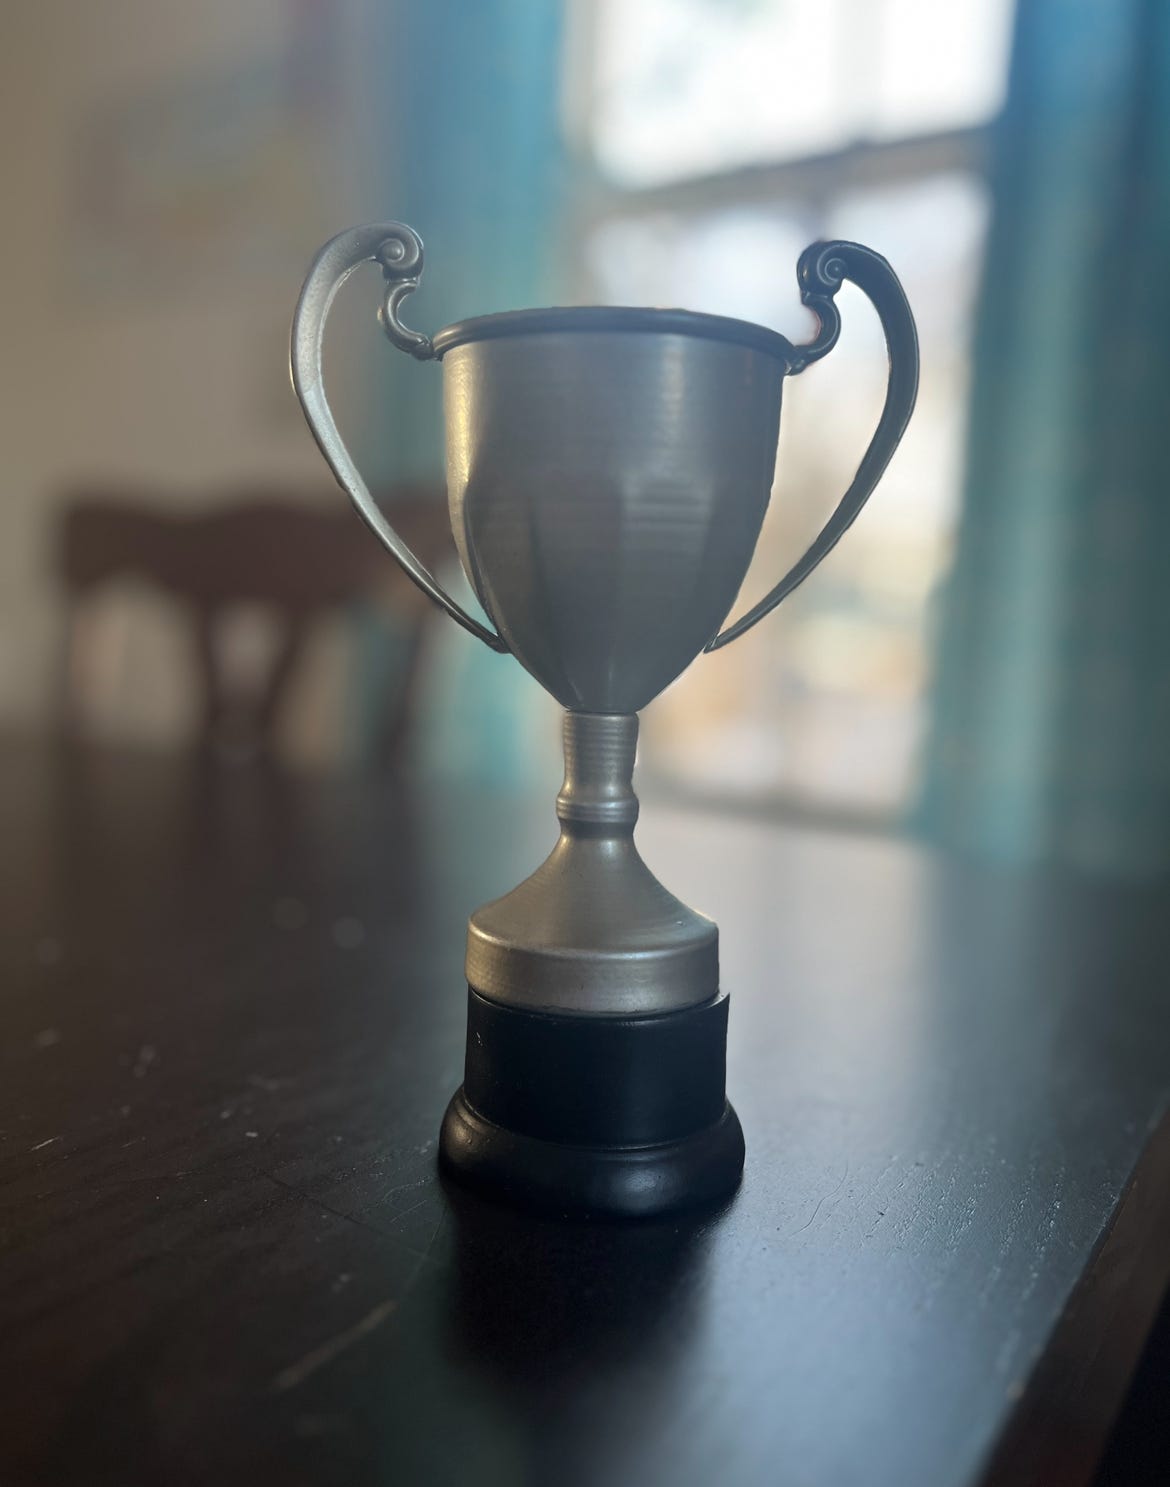 A small, two-handled cup-style trophy sitting on  my table